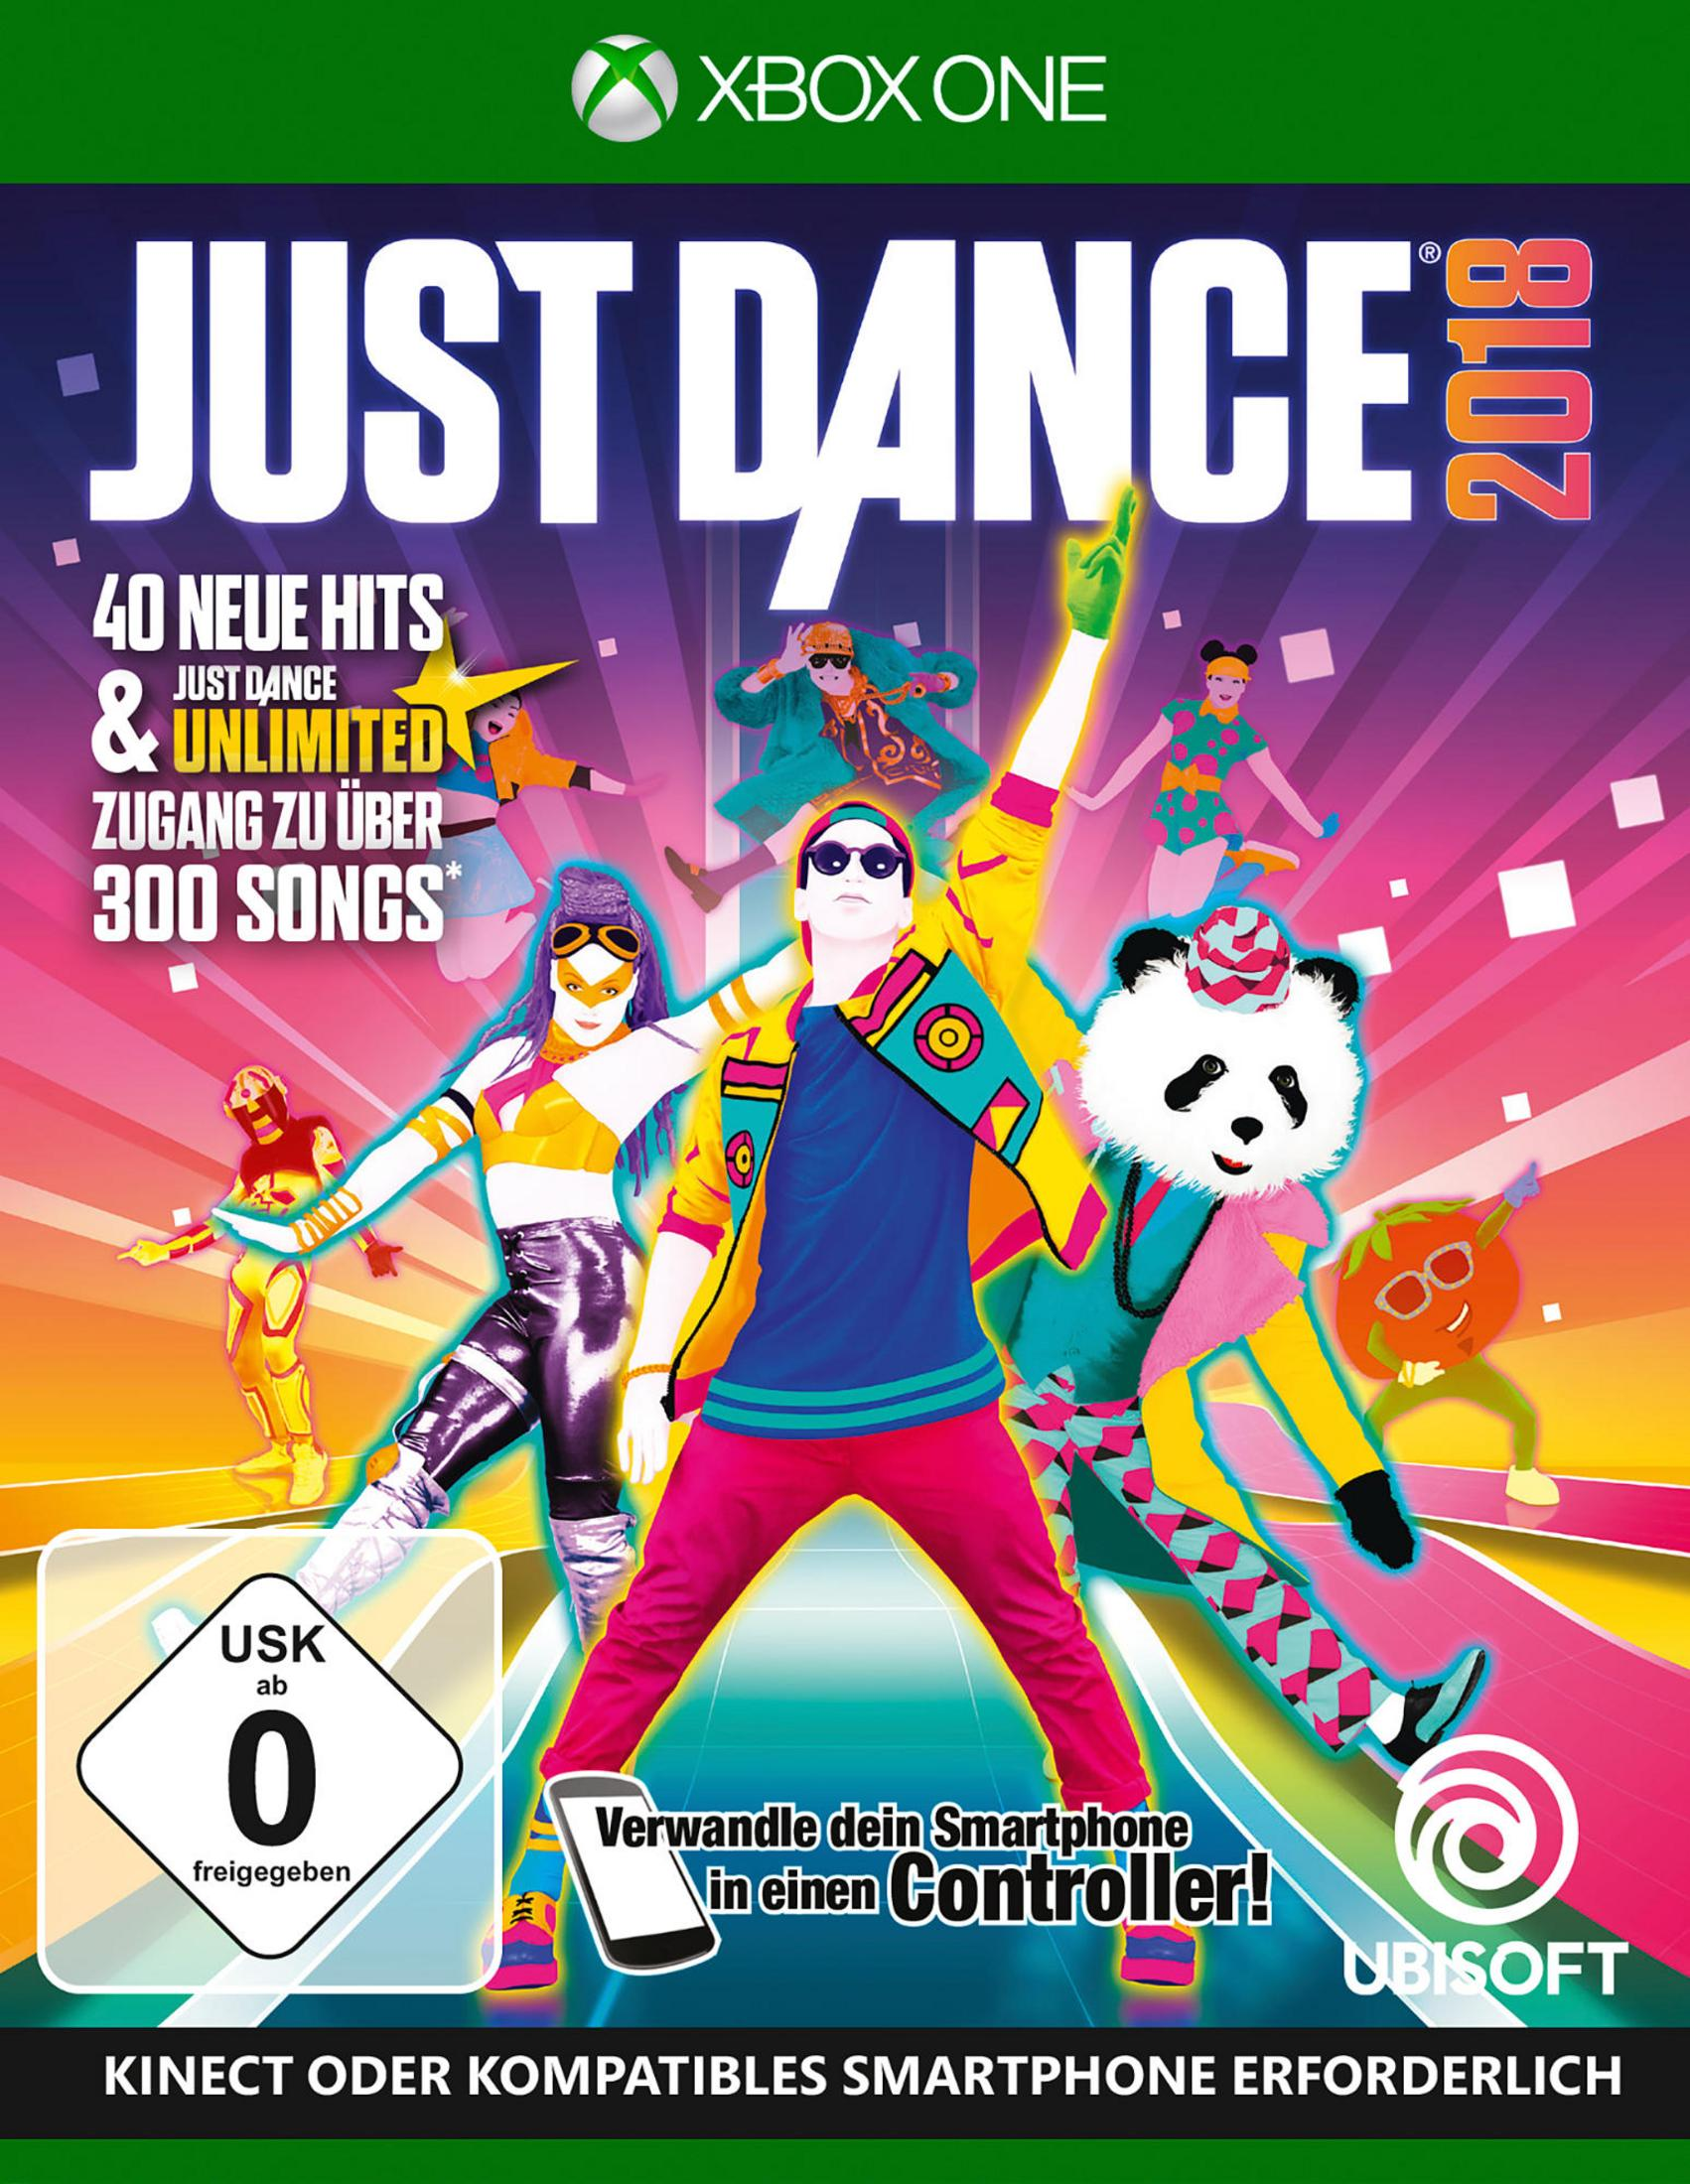 Just Dance 2018 - [Xbox One